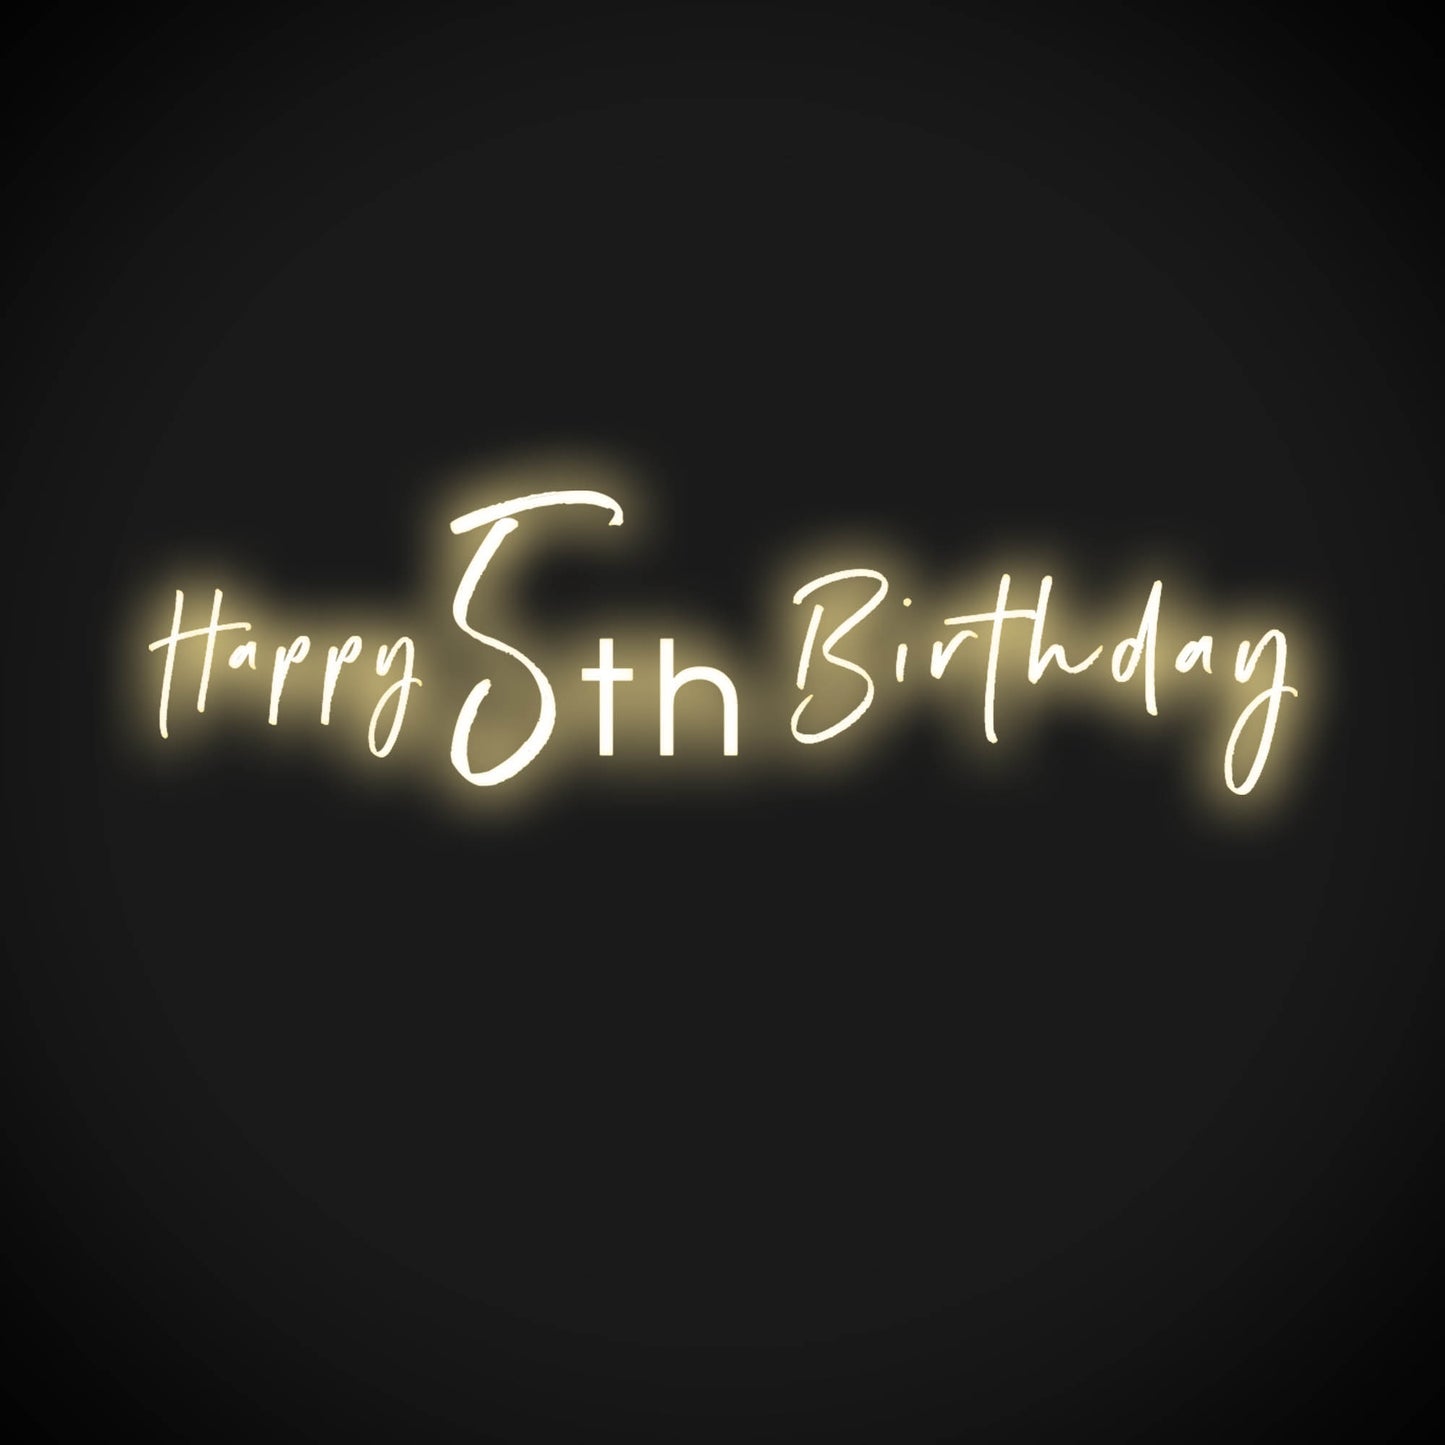 5th Birthday Neon Sign - Neon 5th Birthday Sign - Color Warm White